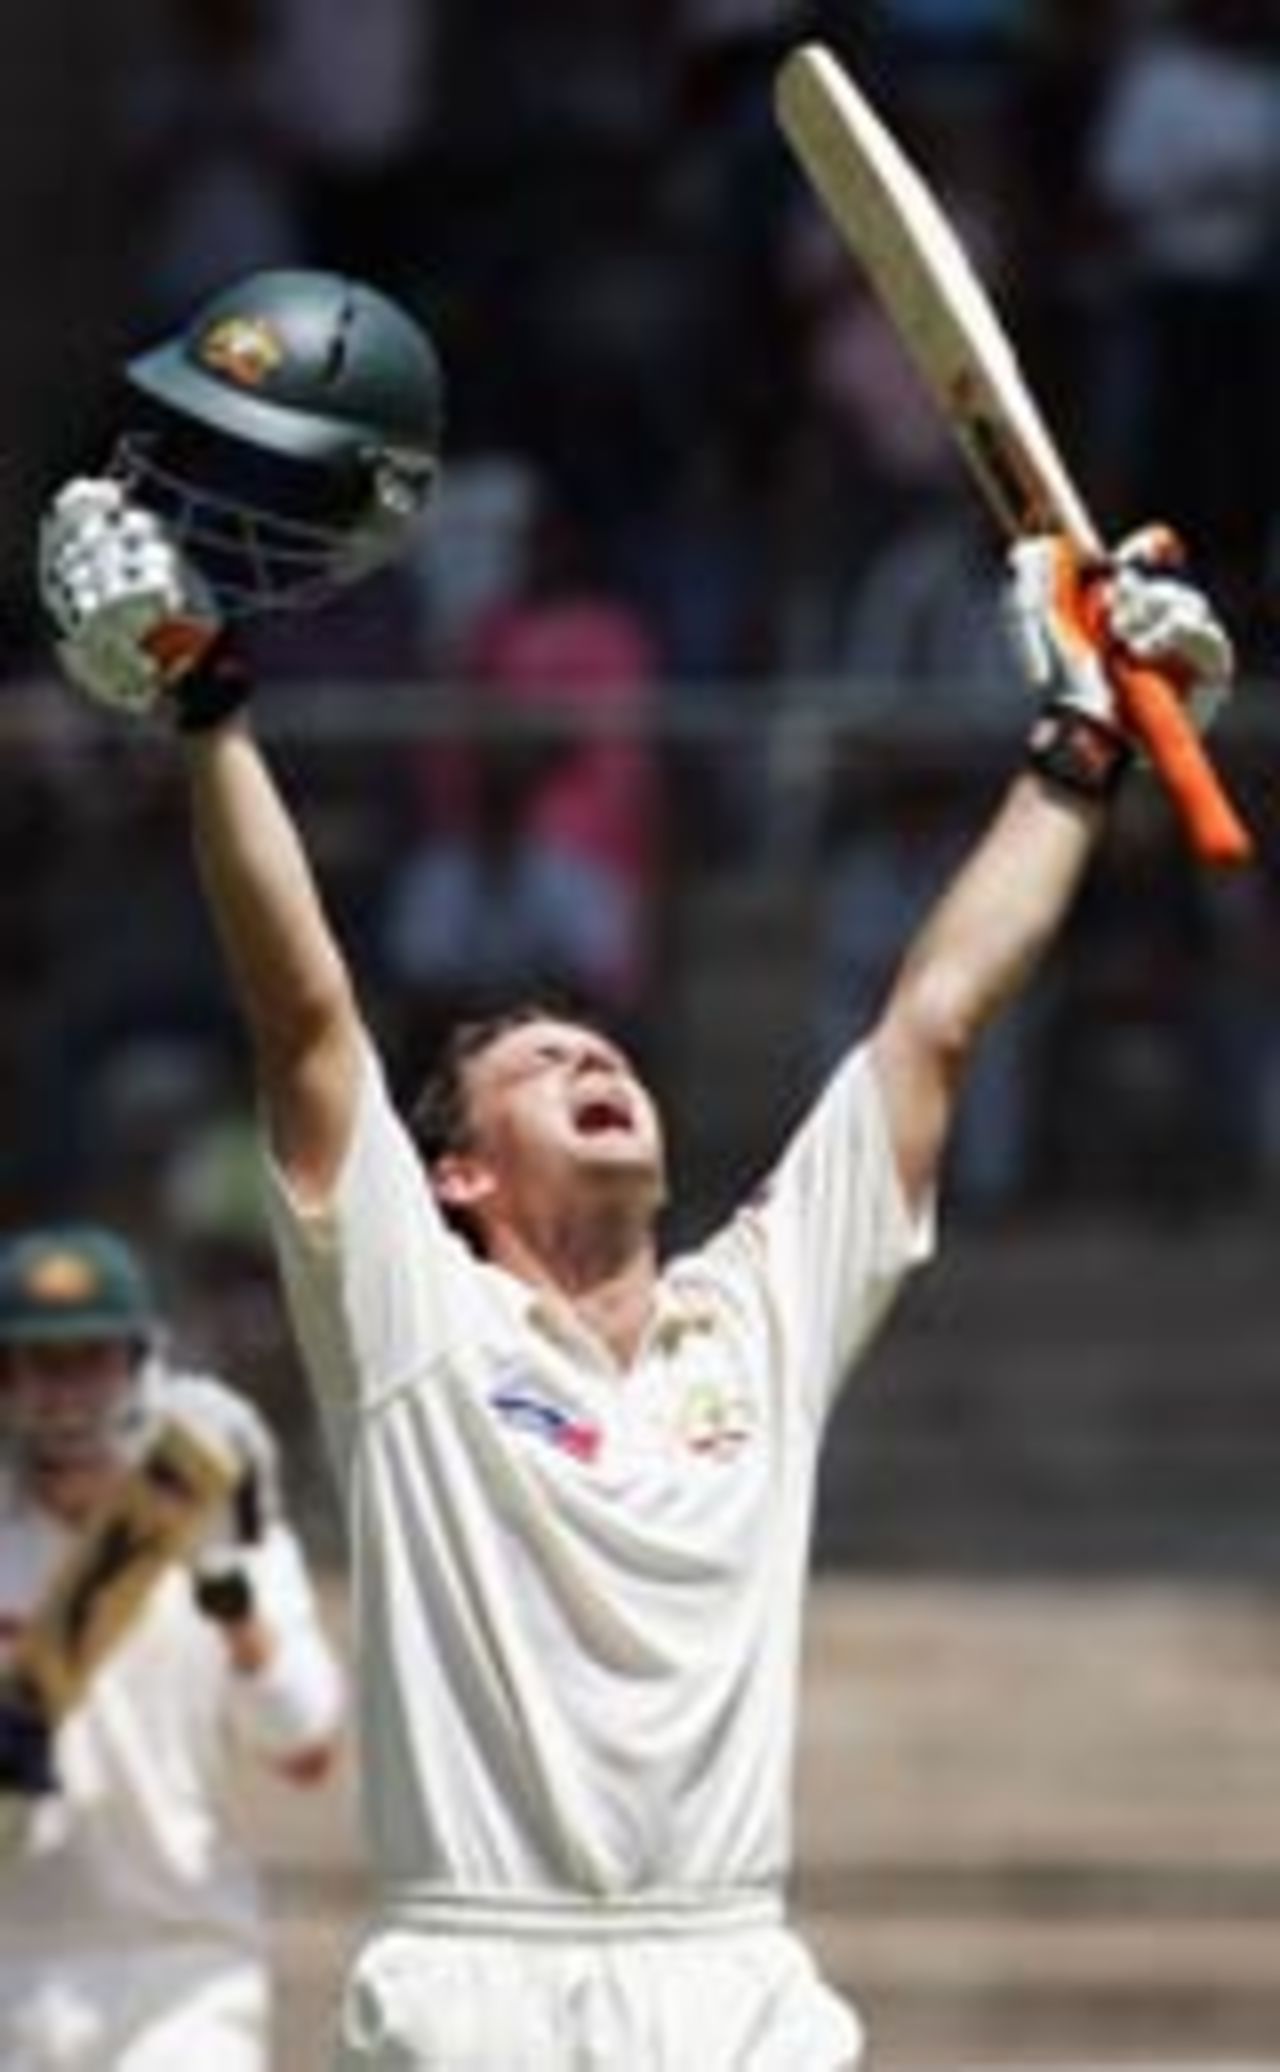 Adam Gilchrist exults after reaching a blistering century, Australia v India, 1st Test, Bangalore, 1st day, October 7, 2004